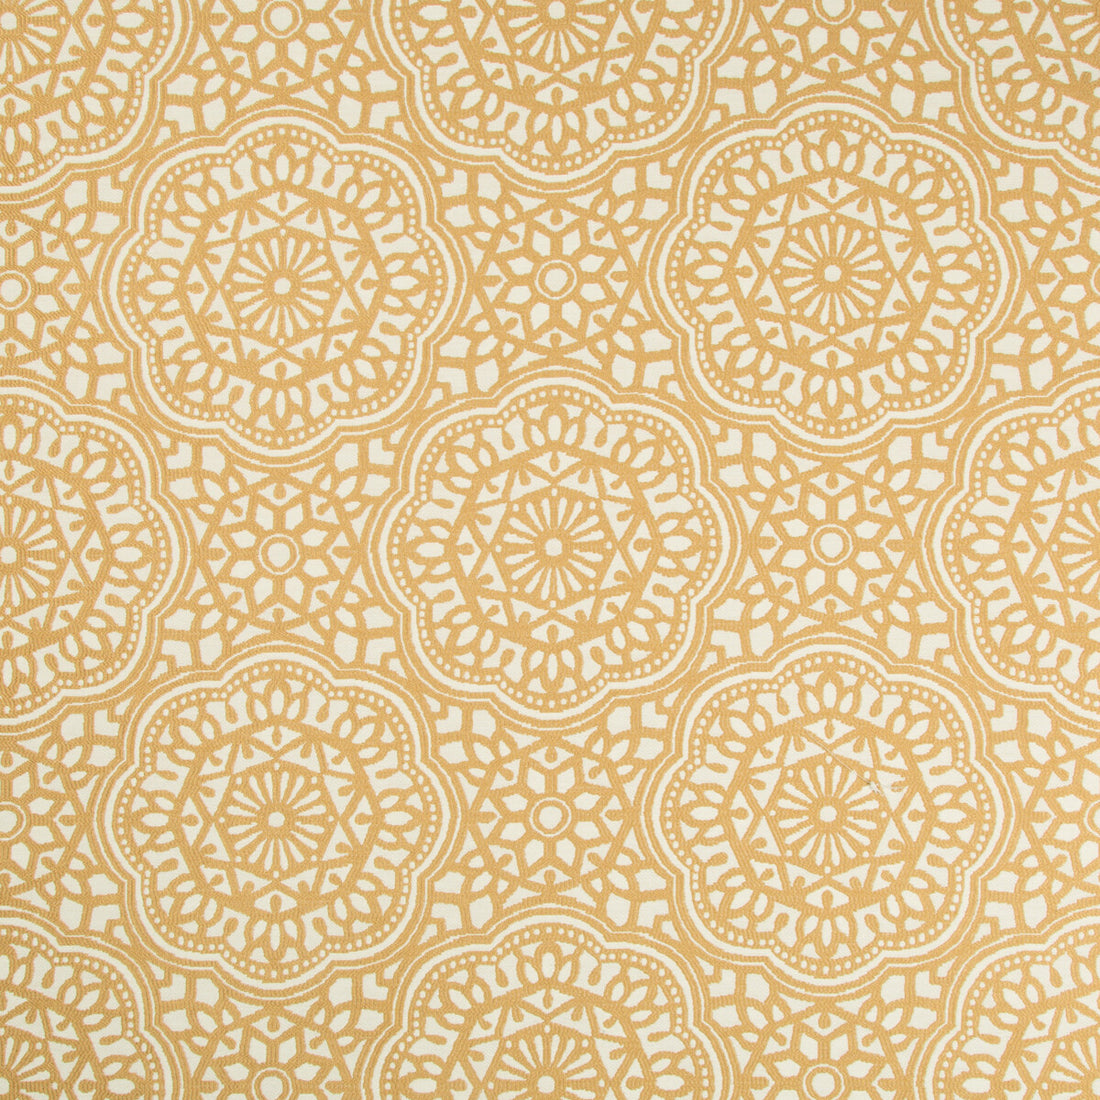 Kravet Contract fabric in 34769-416 color - pattern 34769.416.0 - by Kravet Contract